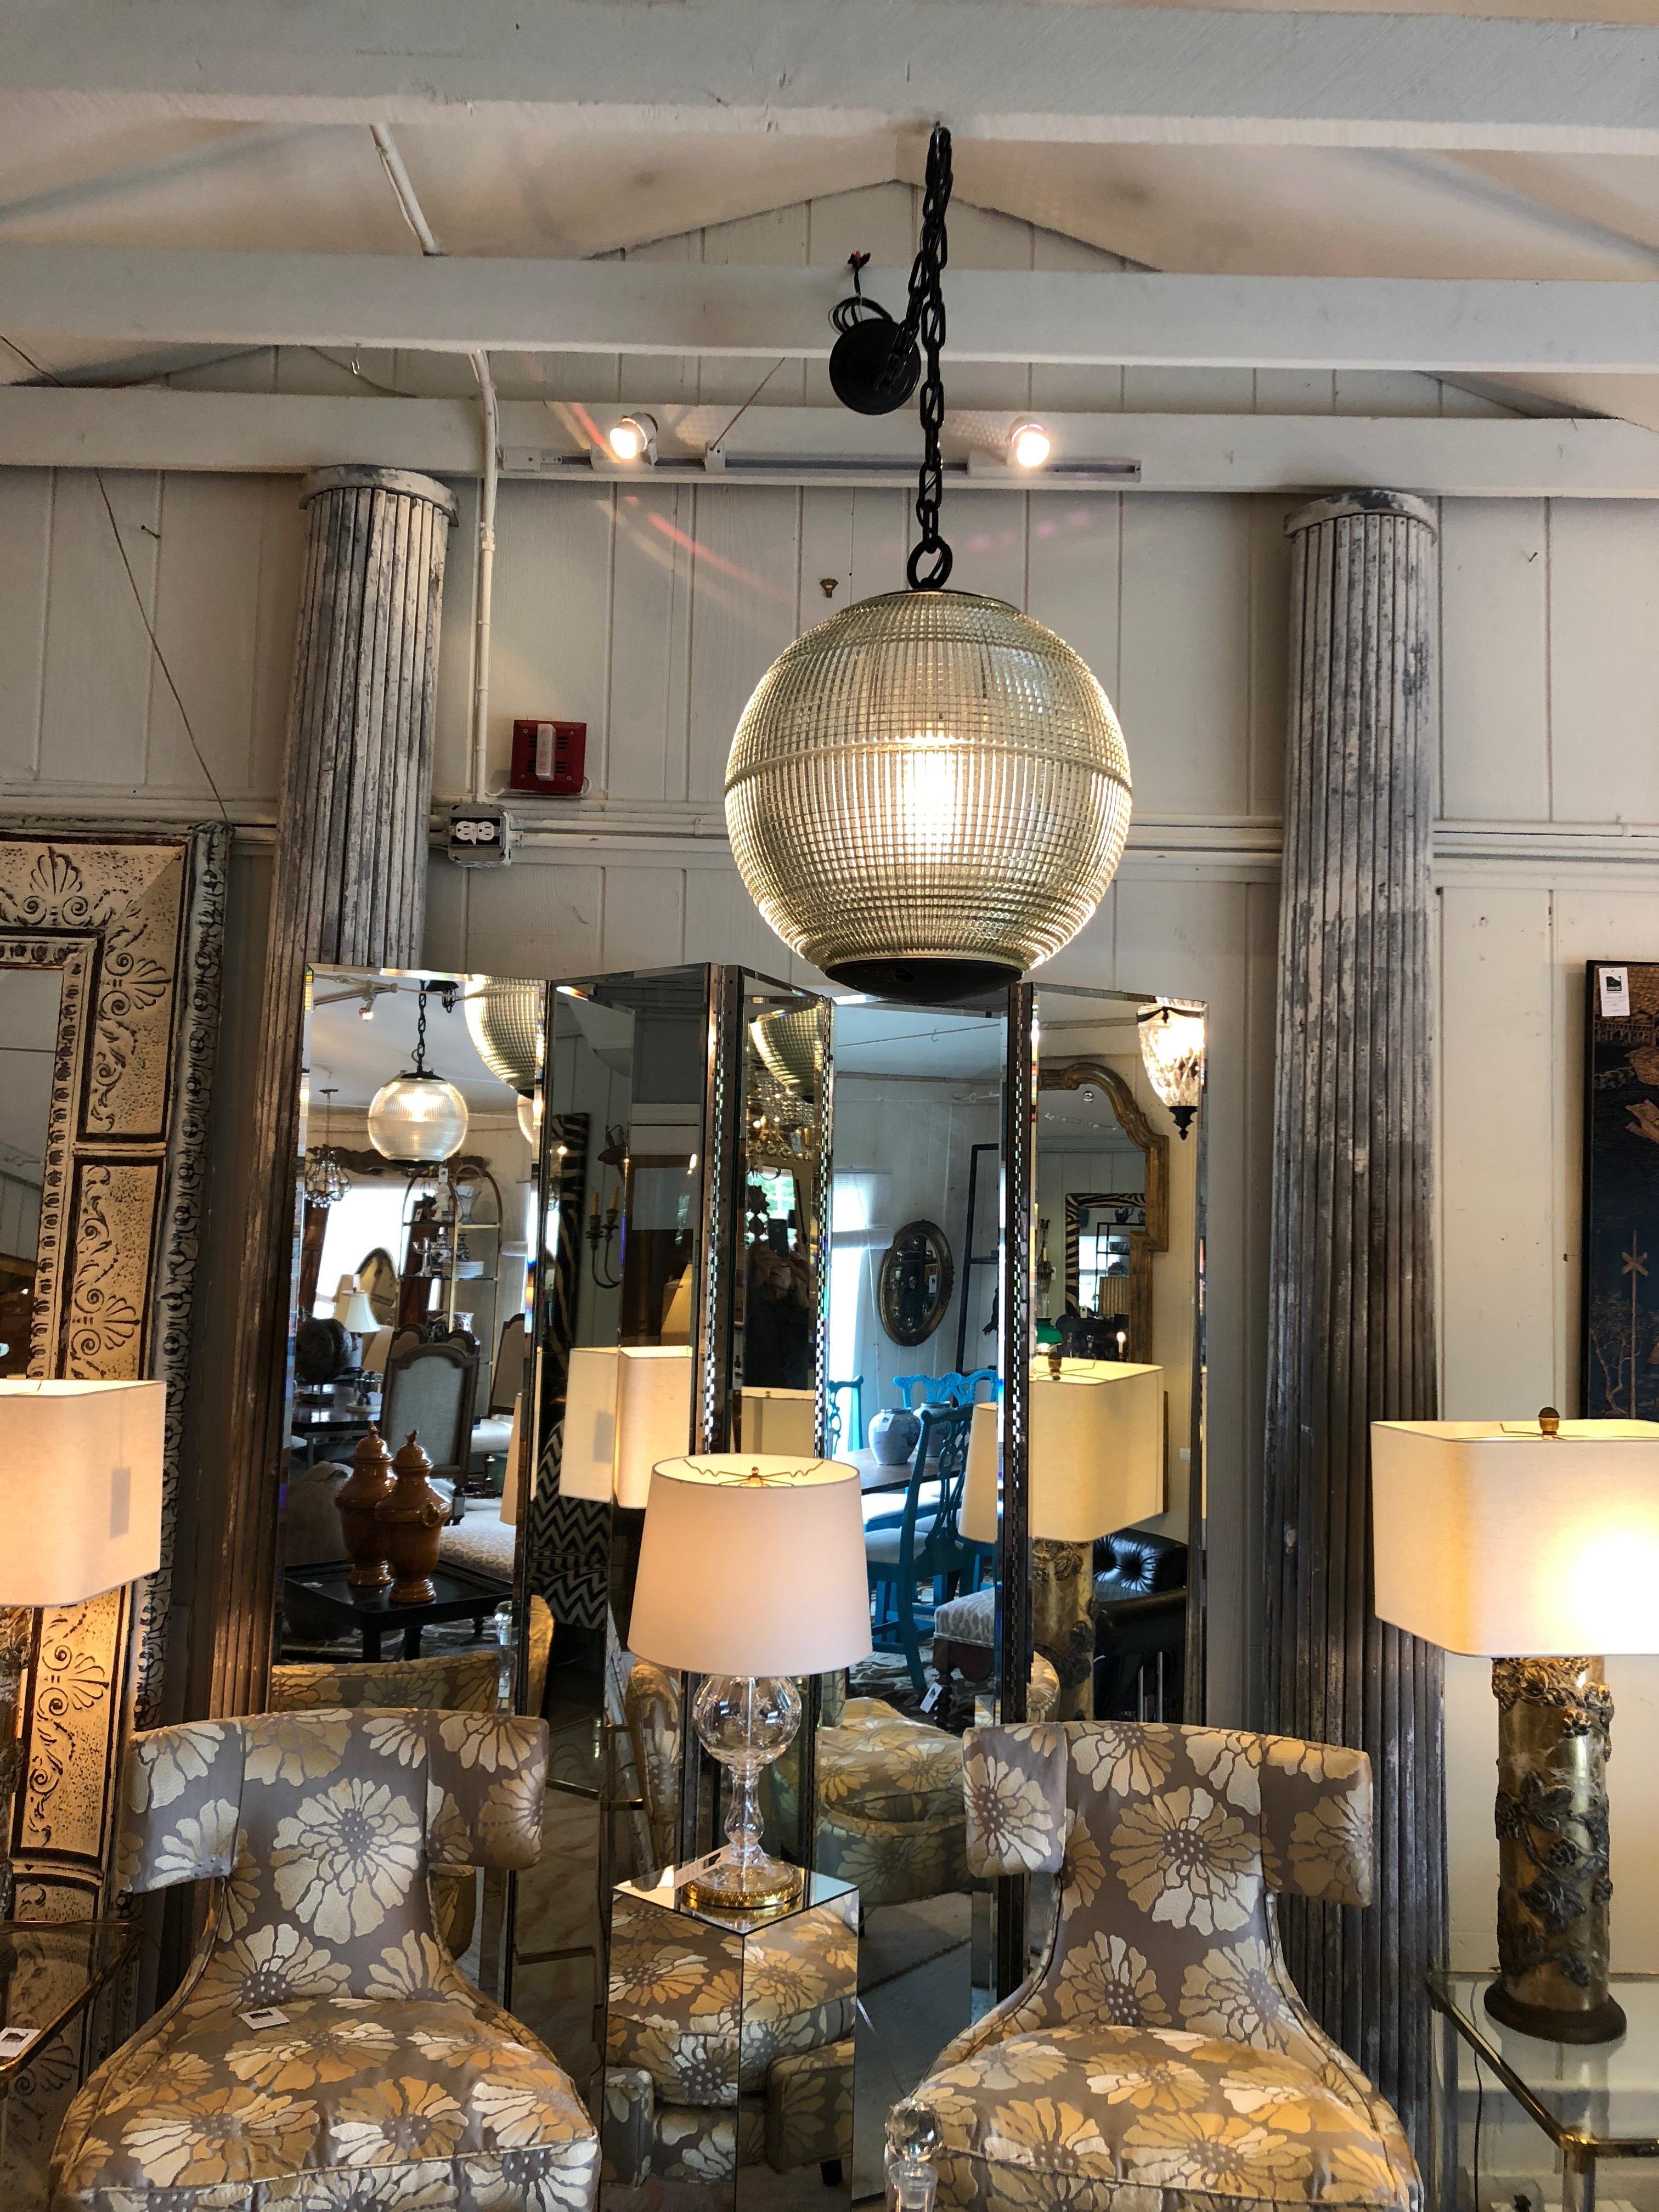 A wonderful very large spherical globe with heavy Industrial chain, originally a Paris streetlight and transformed into a hanging pendant. The hallmark of Holophane luminaires, or lighting fixtures, is the borosilicate glass reflector/refractor. The